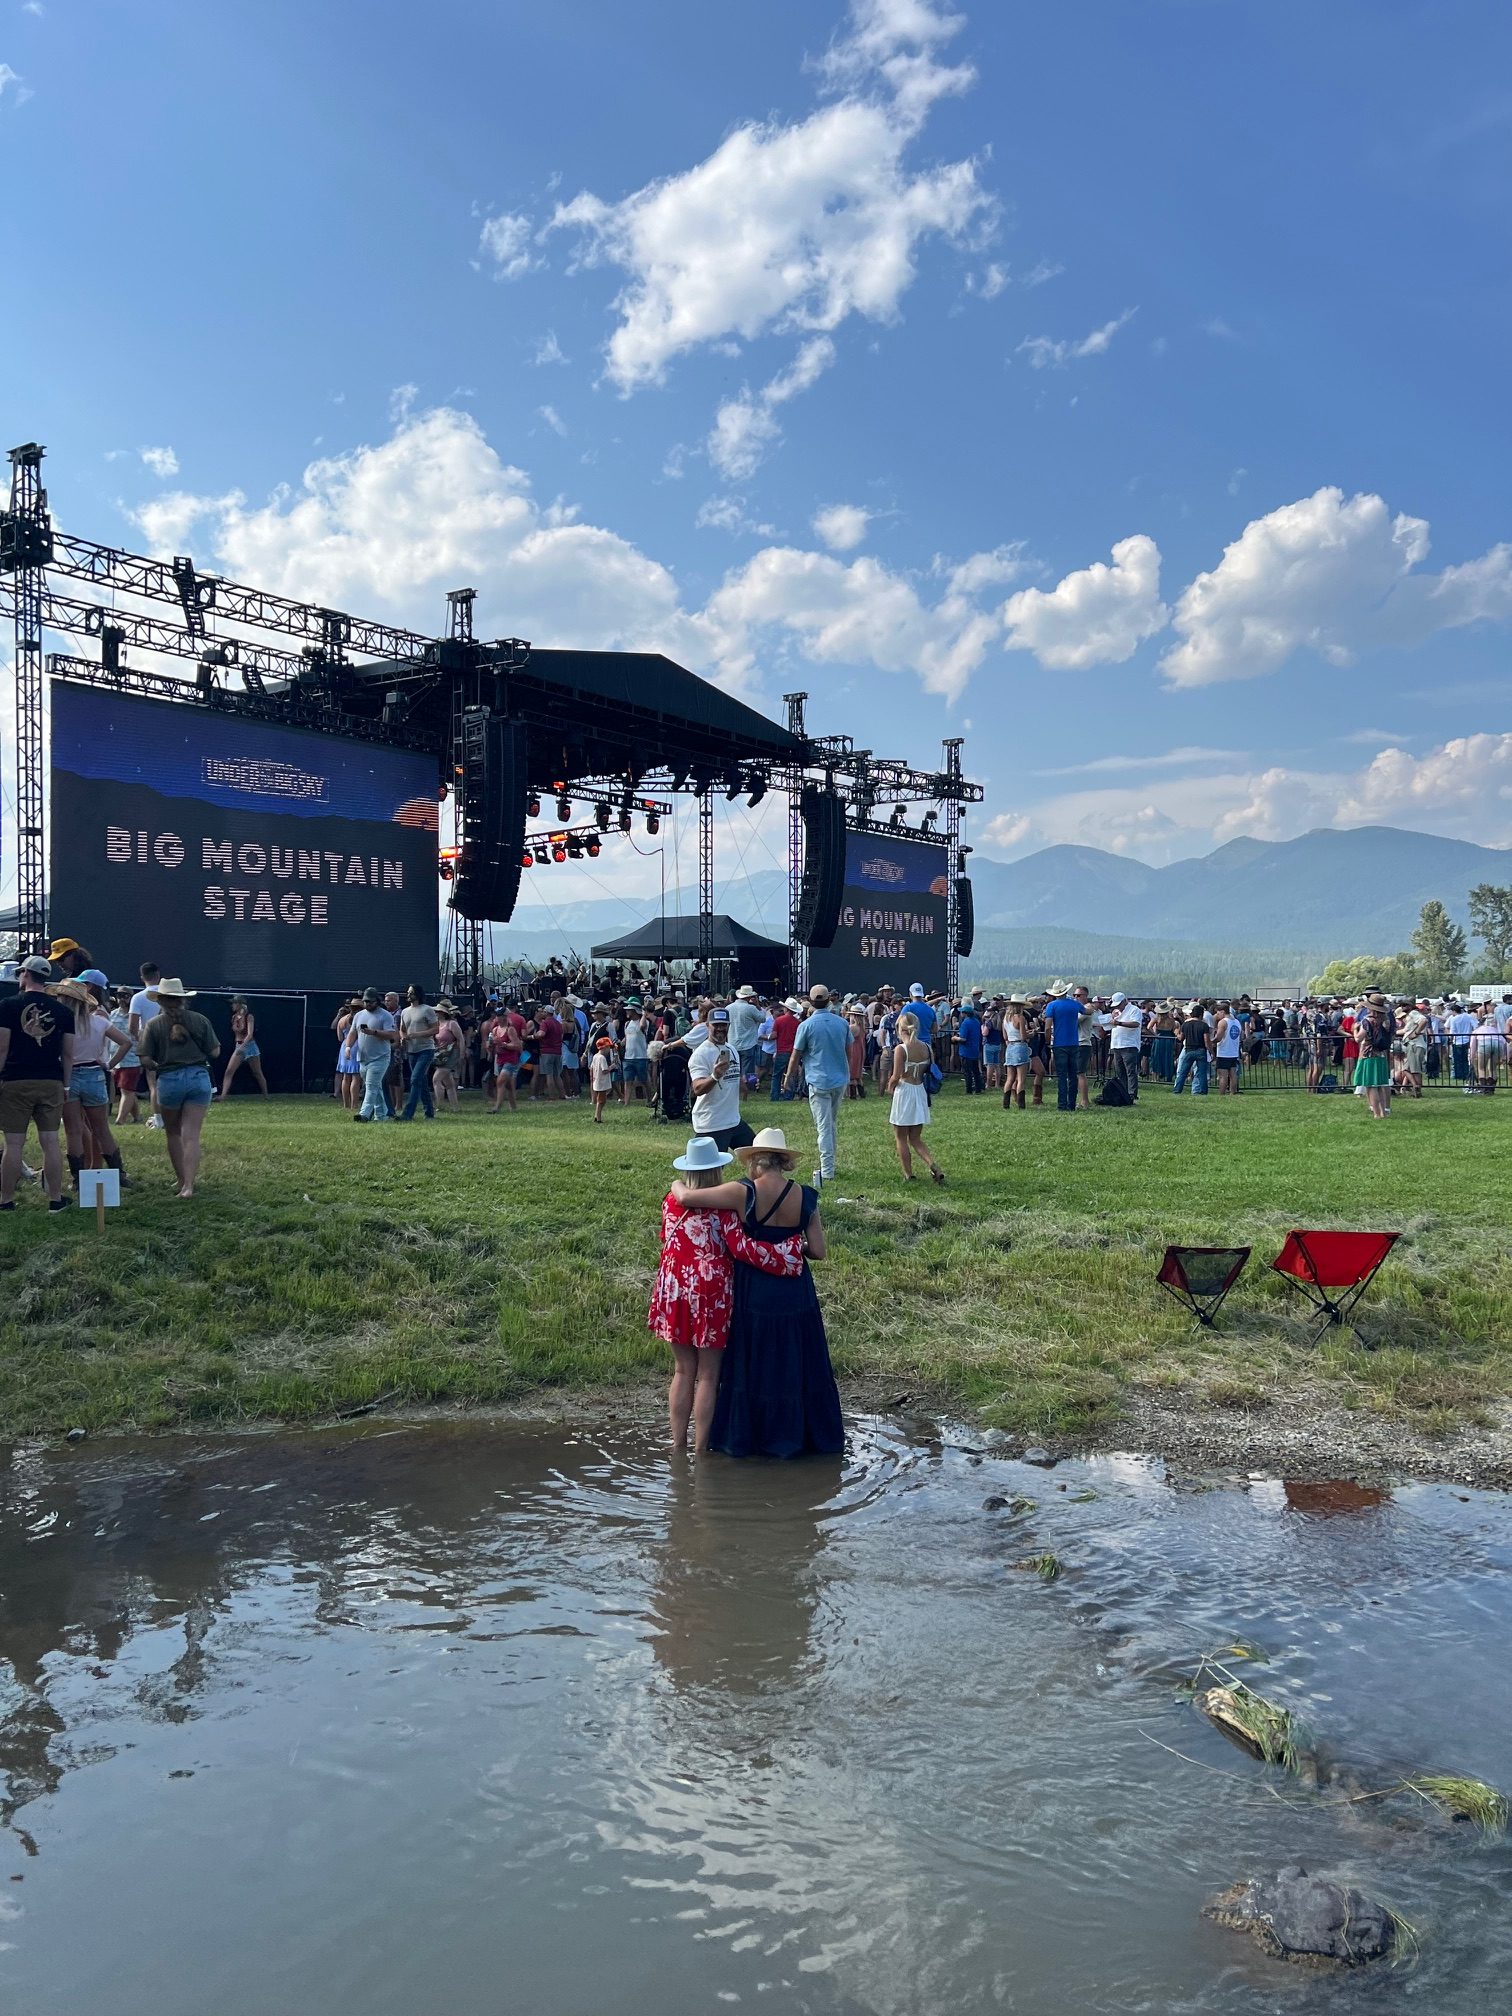 A creek is part of the setting at the Big Mountain Stage during Under the Big Sky Fest.